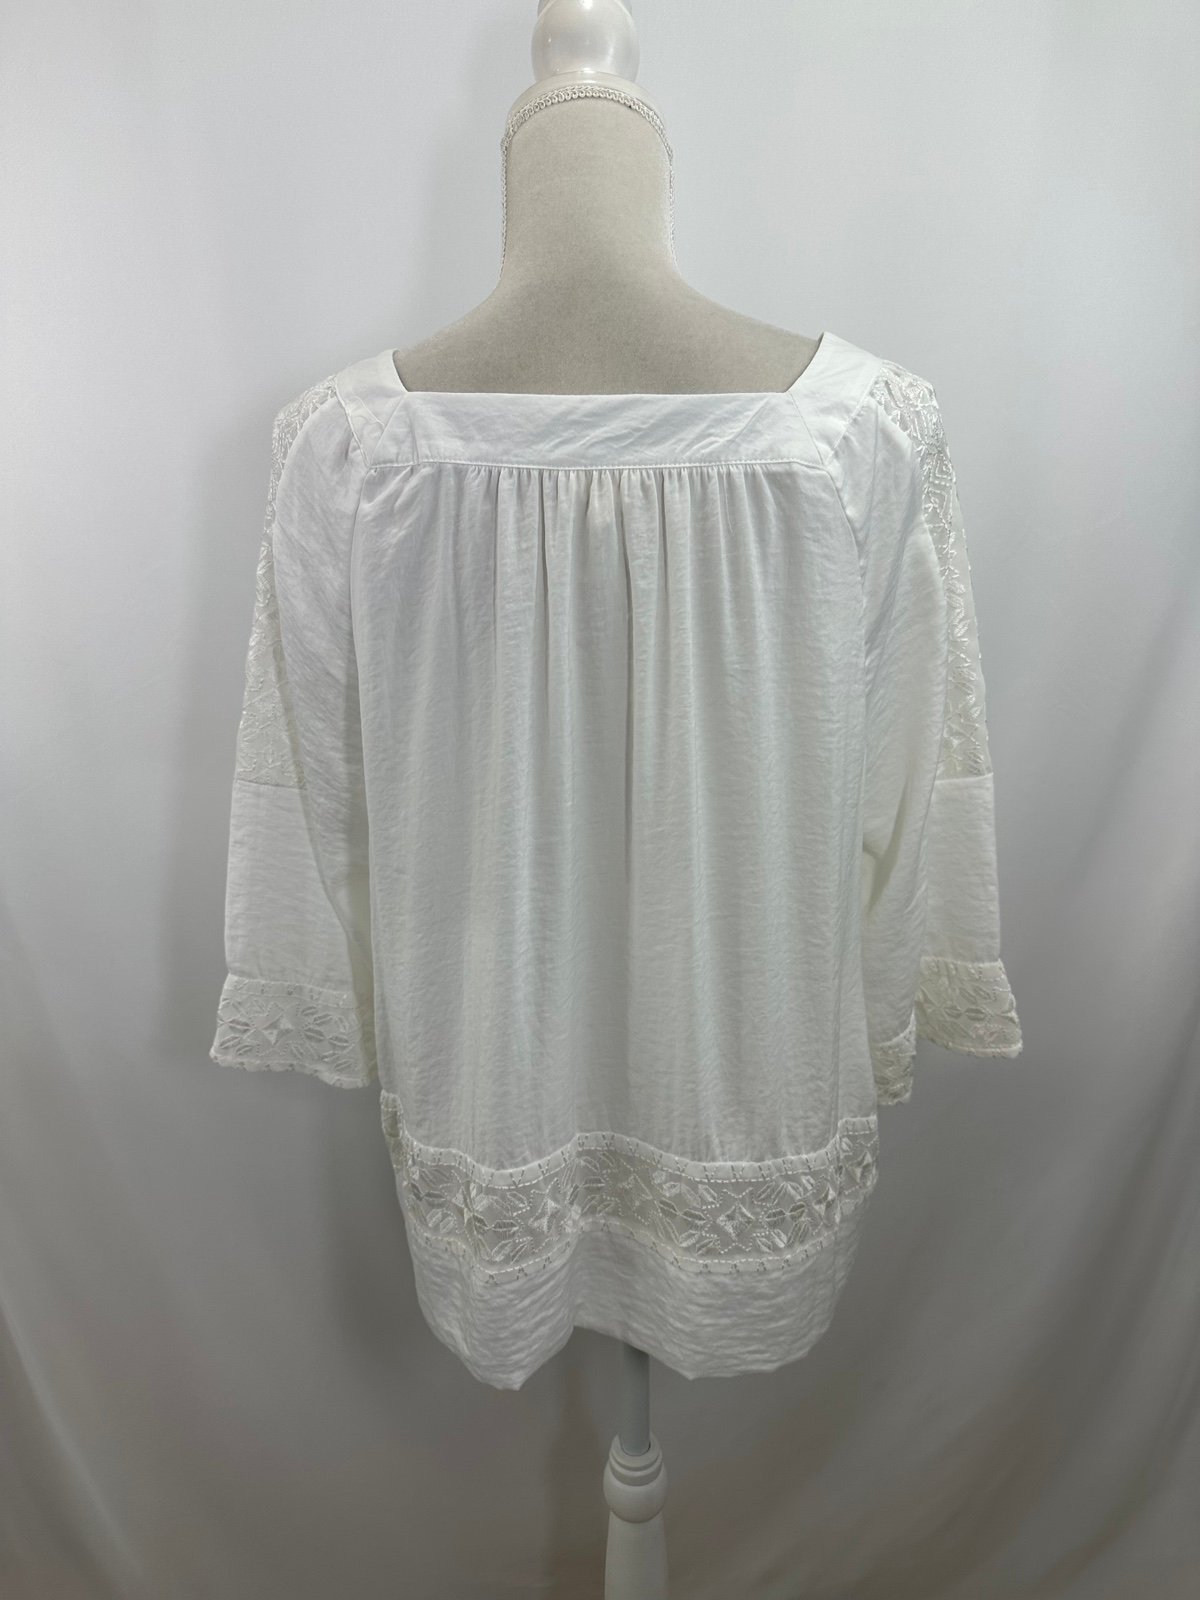 The Best Seller Adiva White Crushed Satin Lace Blouse Size L PRGehzvF2 Outlet Store